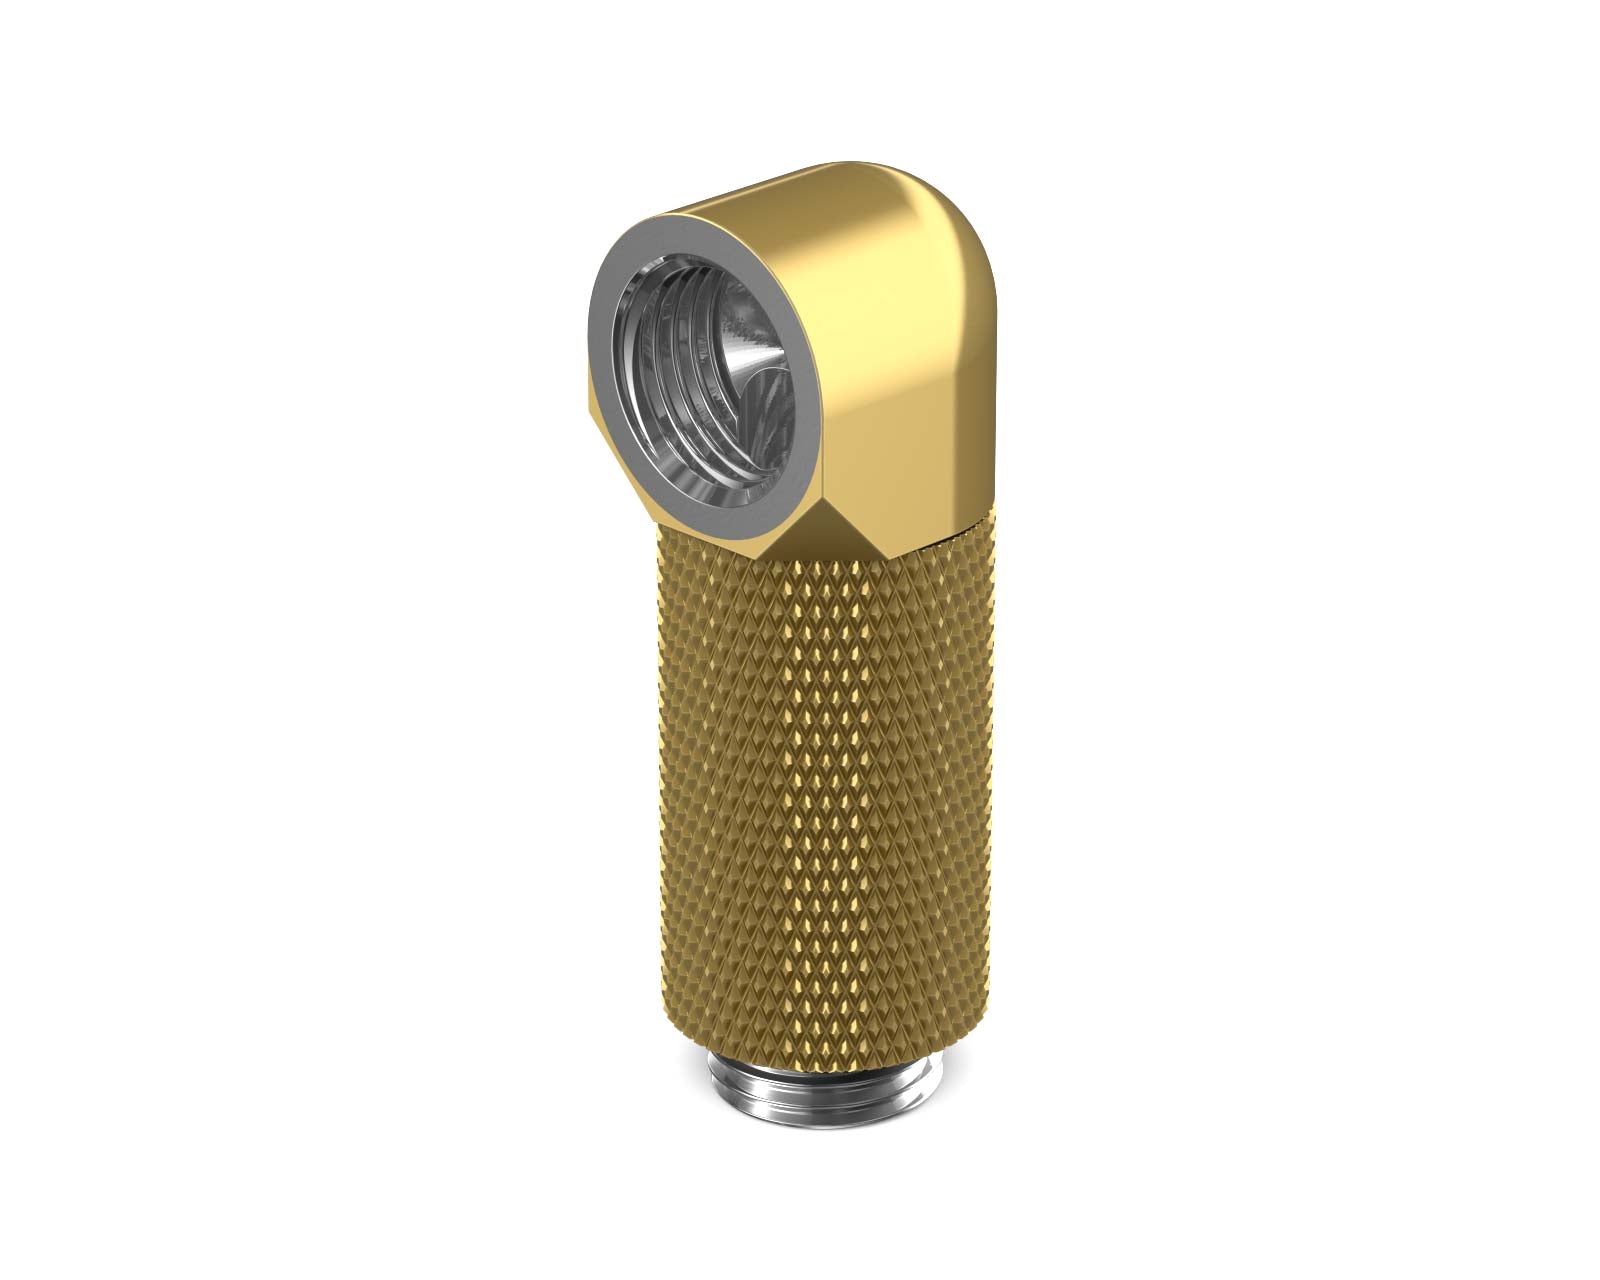 BSTOCK:PrimoChill Male to Female G 1/4in. 90 Degree SX Rotary 30mm Extension Elbow Fitting - Candy Gold